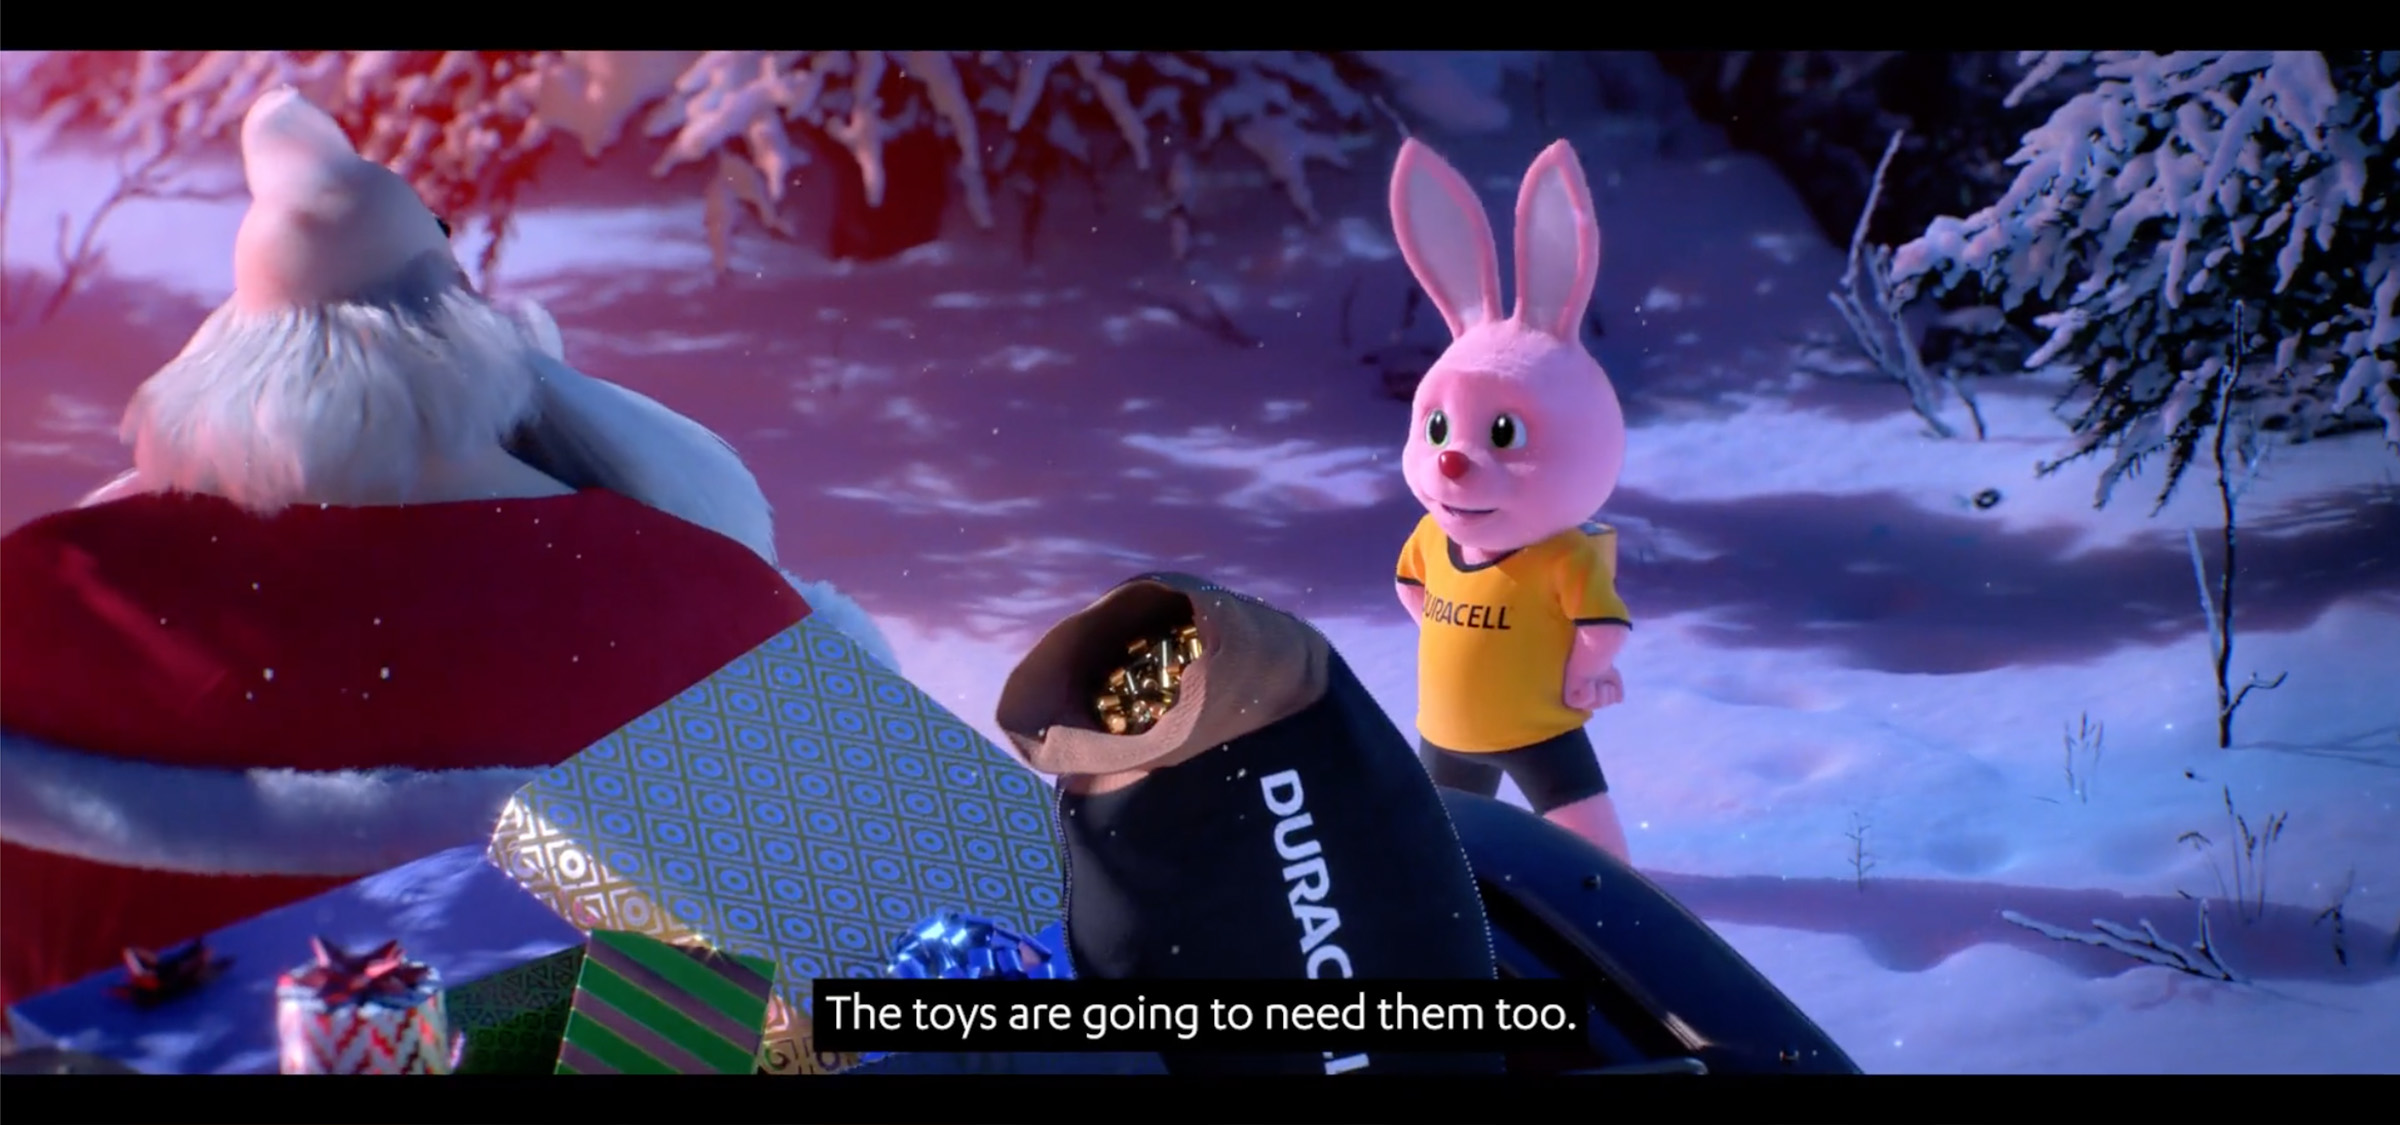 The Duracell Bunny is the new hero of Christmas in integrated campaign